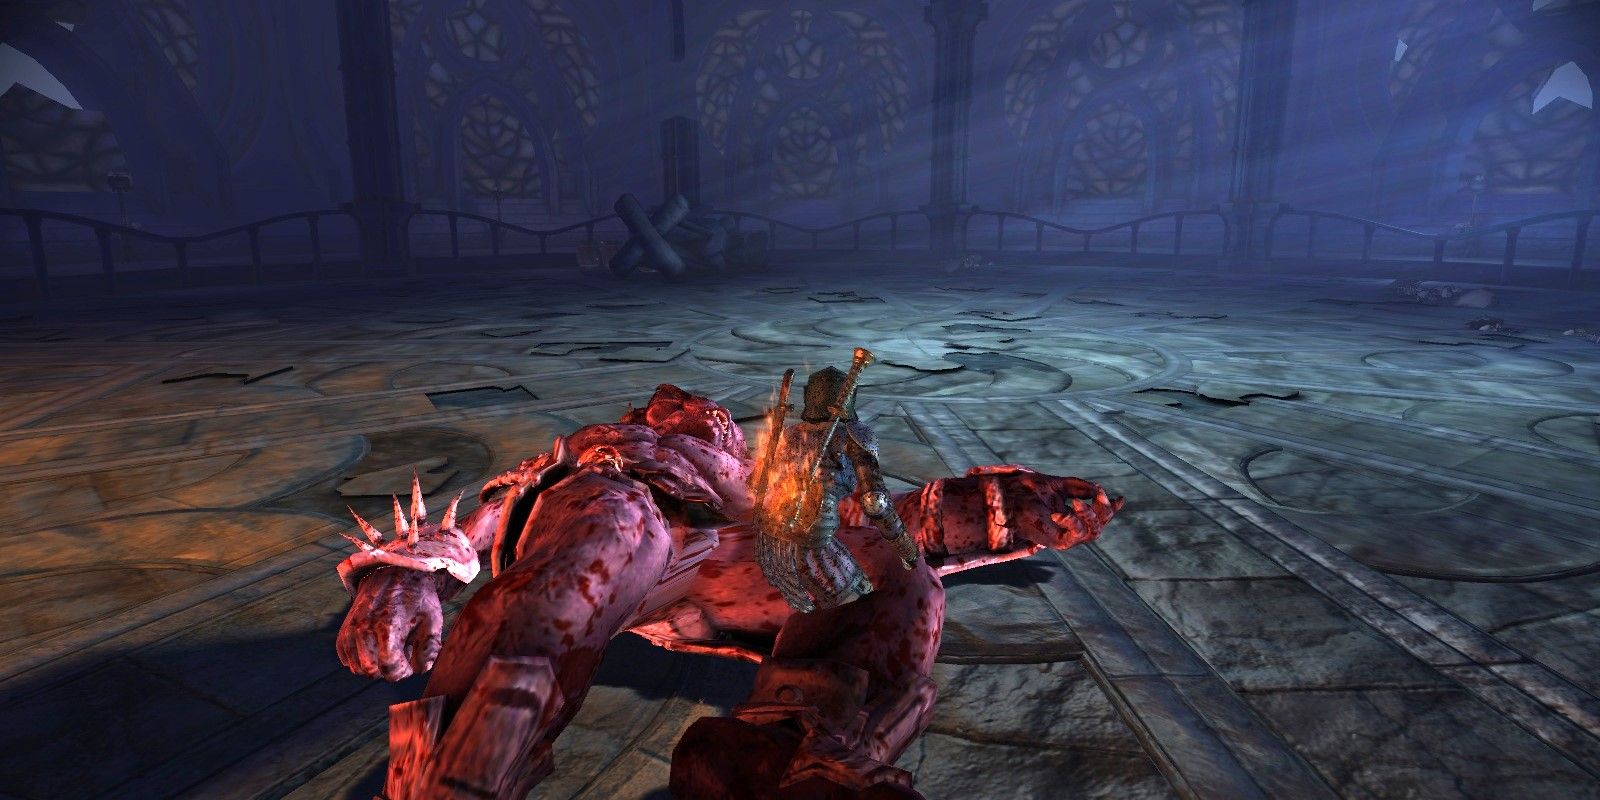 Brosca defeats an ogre in the Tower of Ishal in Dragon Age: Origins